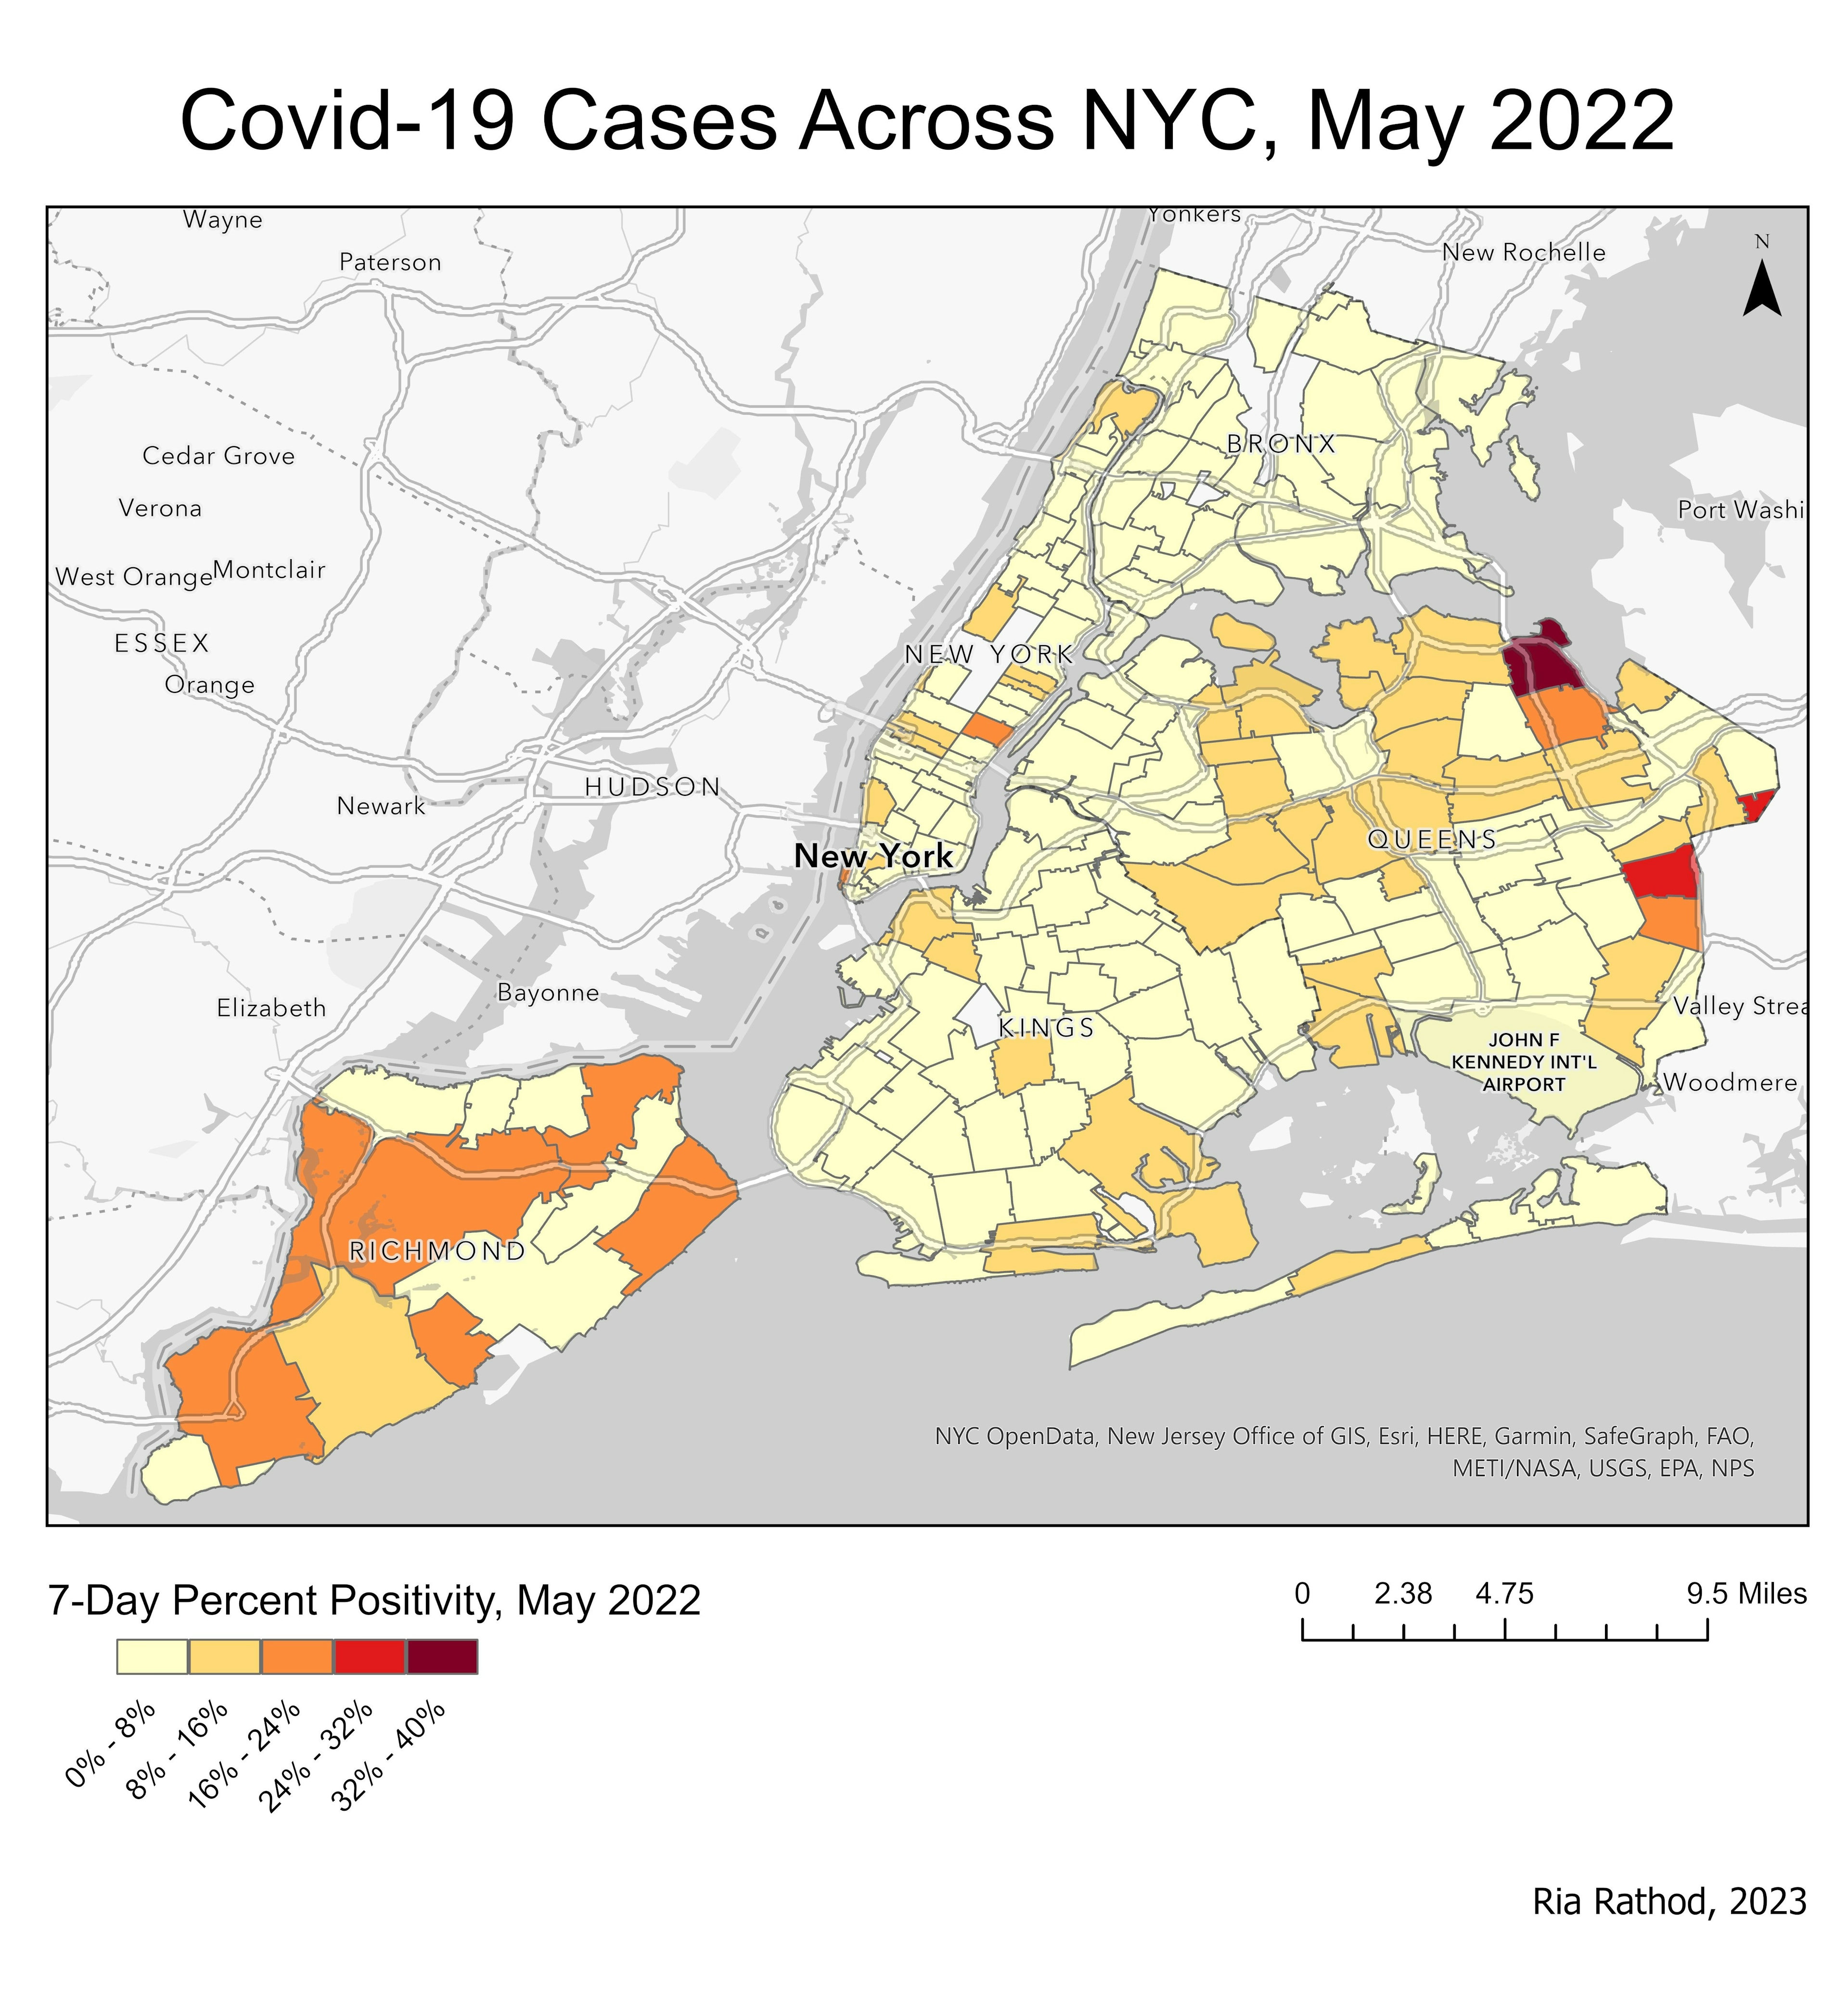 COVID-19 Cases Across NYC, May 2022